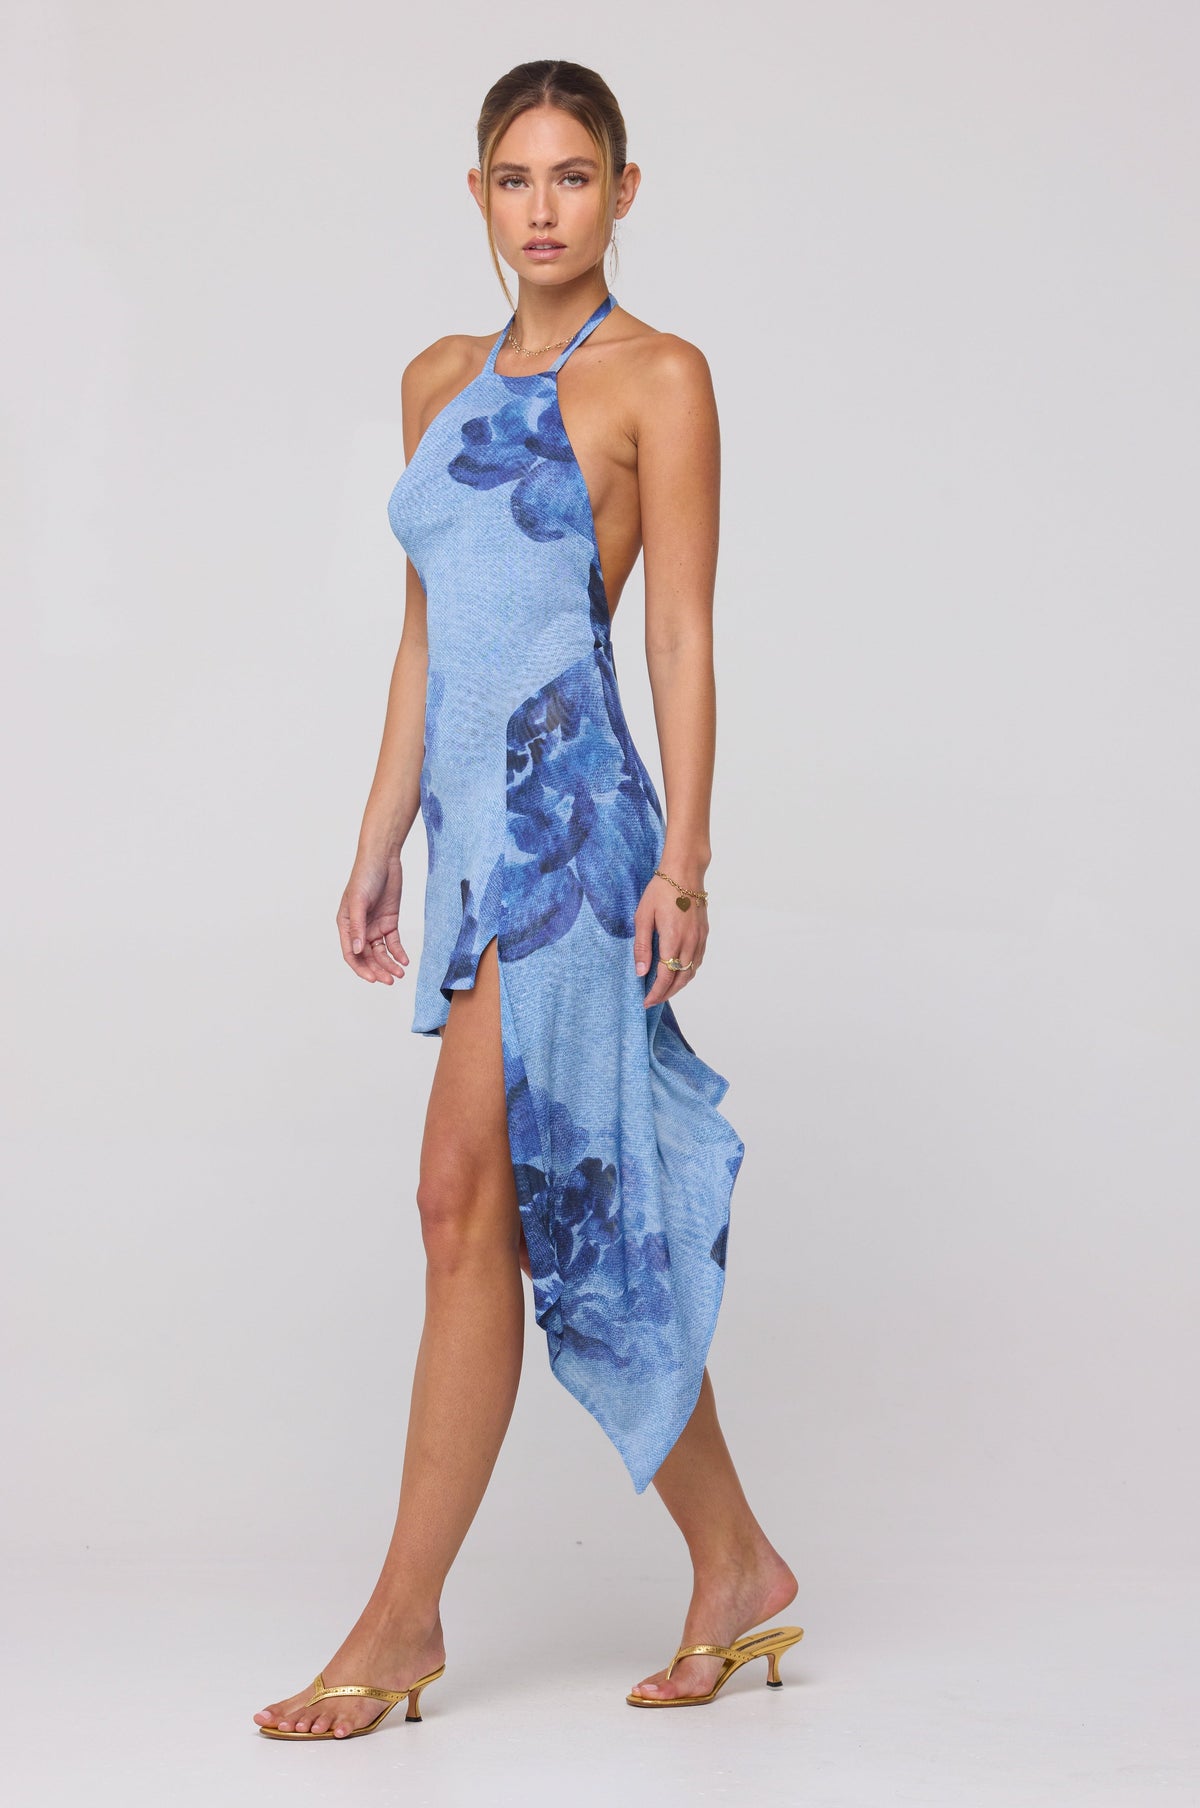 This is an image of Olivia Mini in Indigo - RESA featuring a model wearing the dress